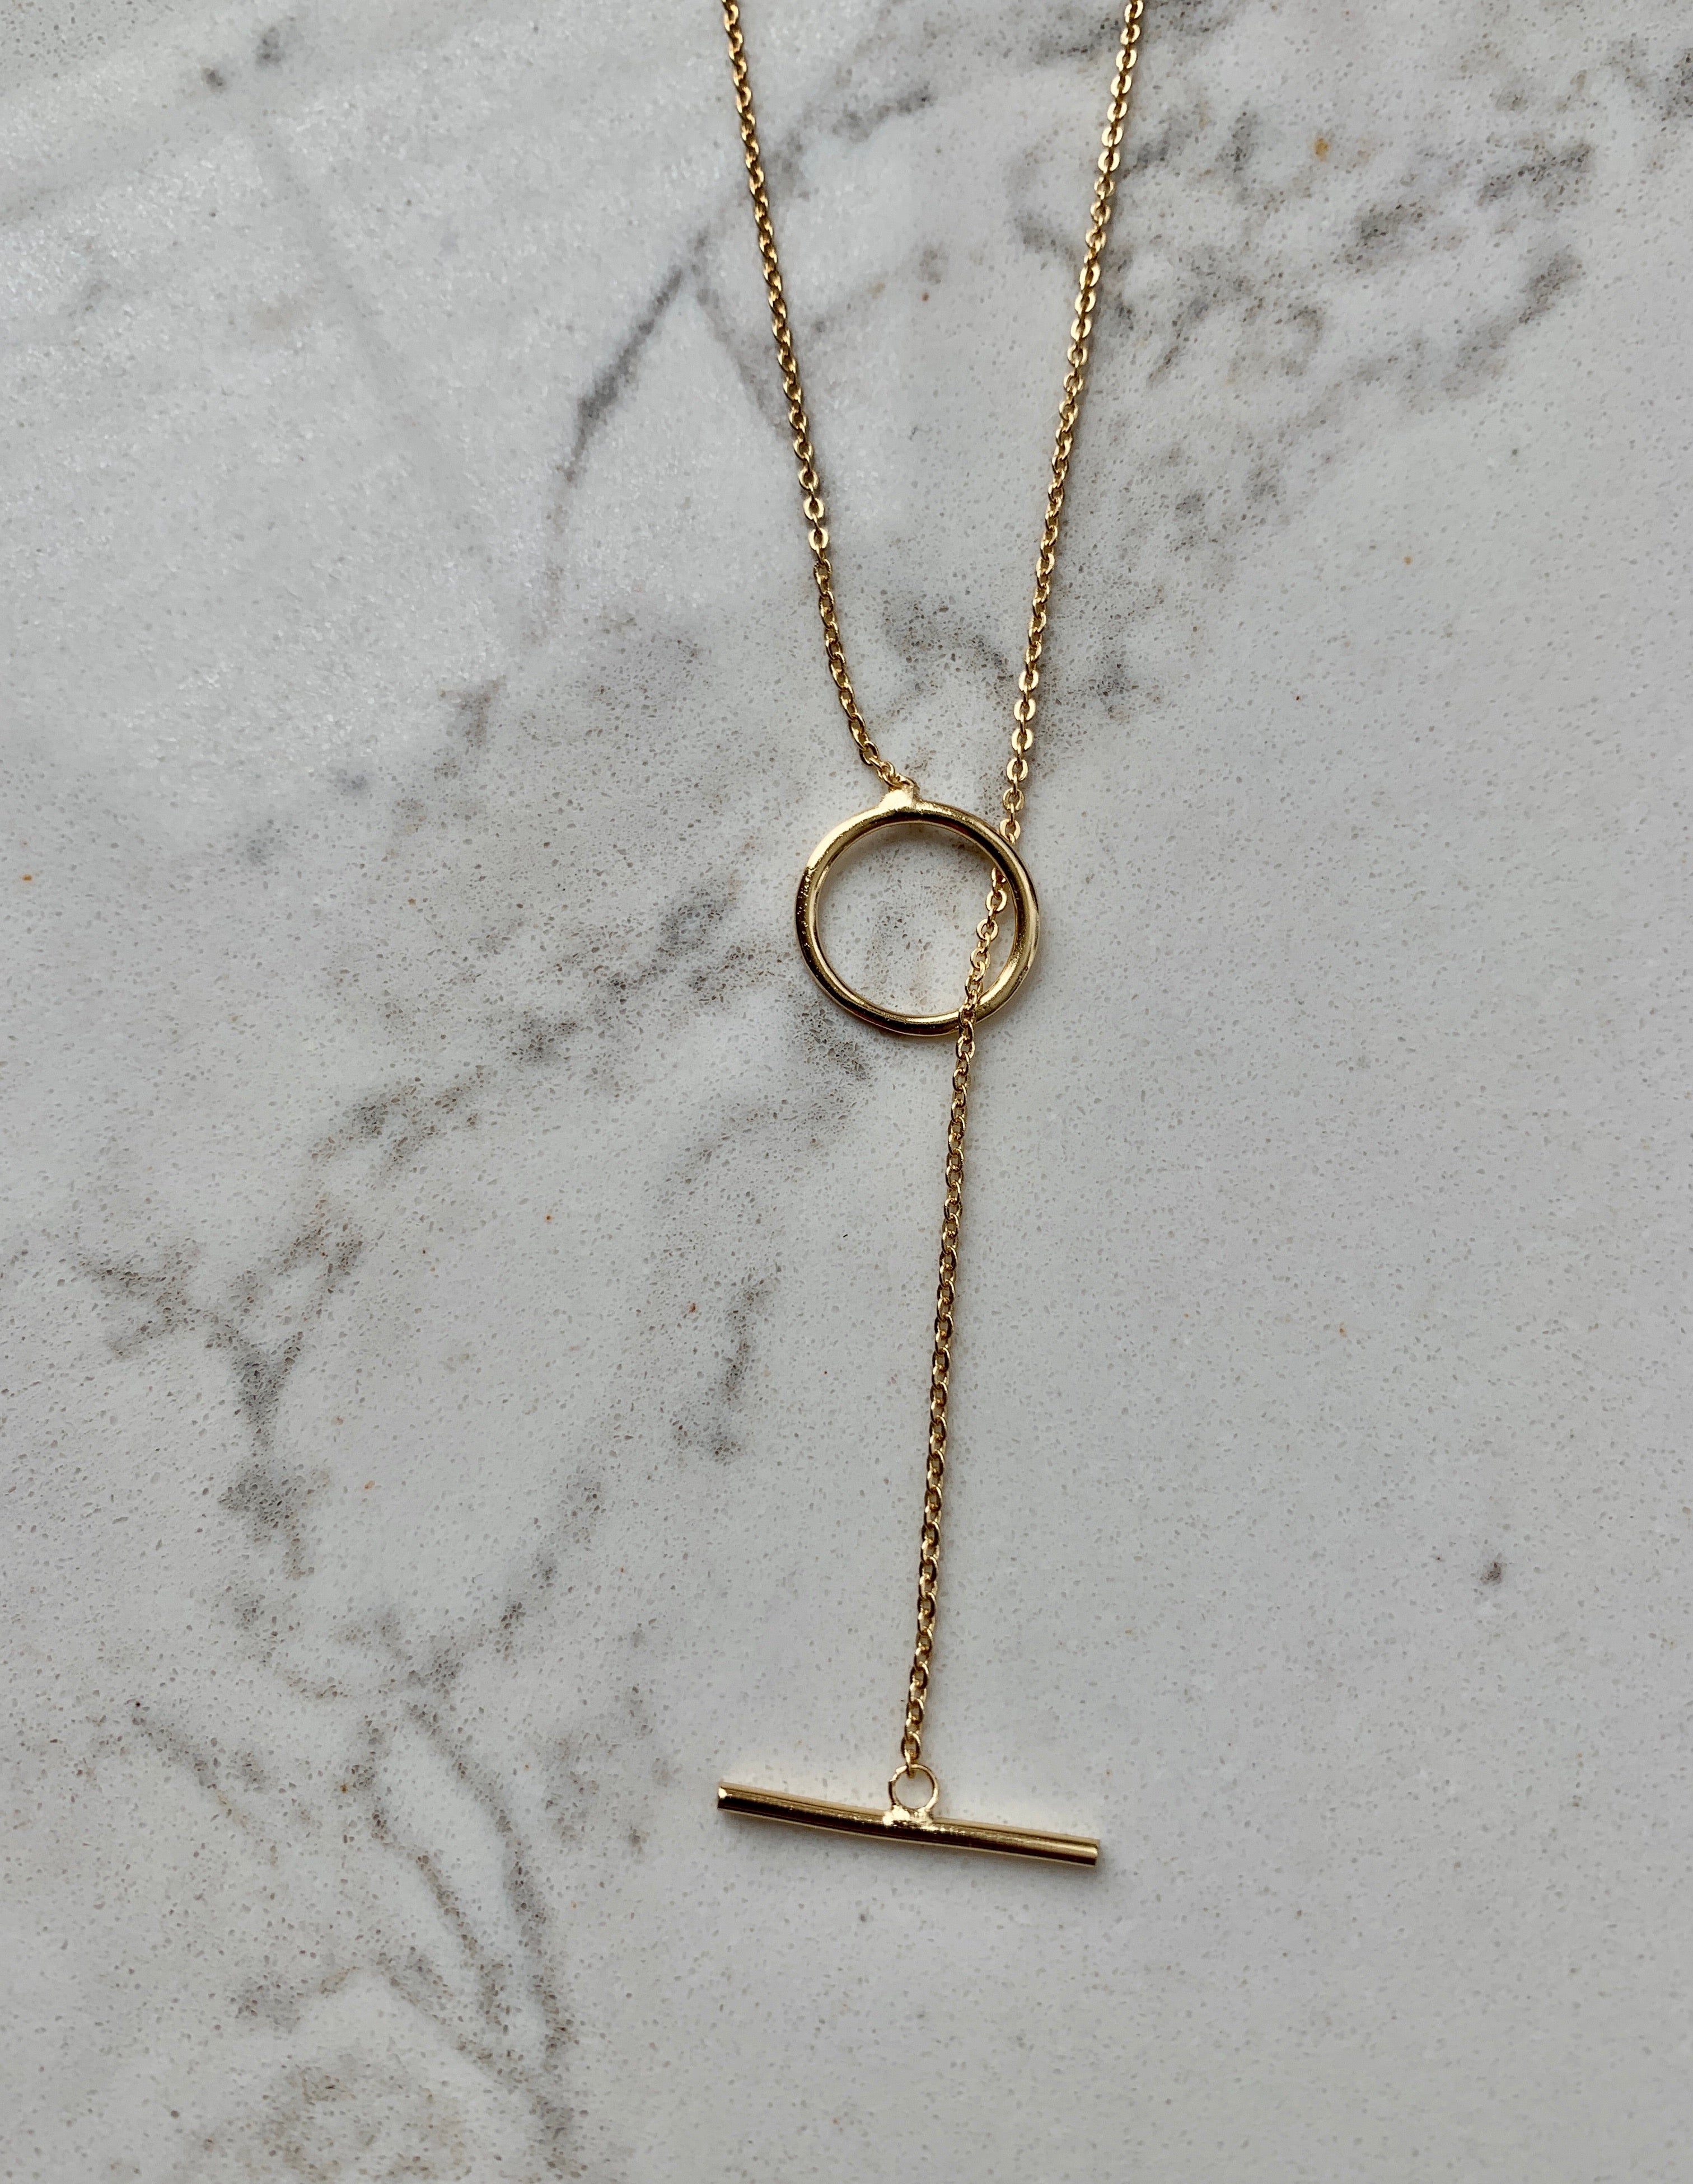 Gold Lariat Chain Necklace.